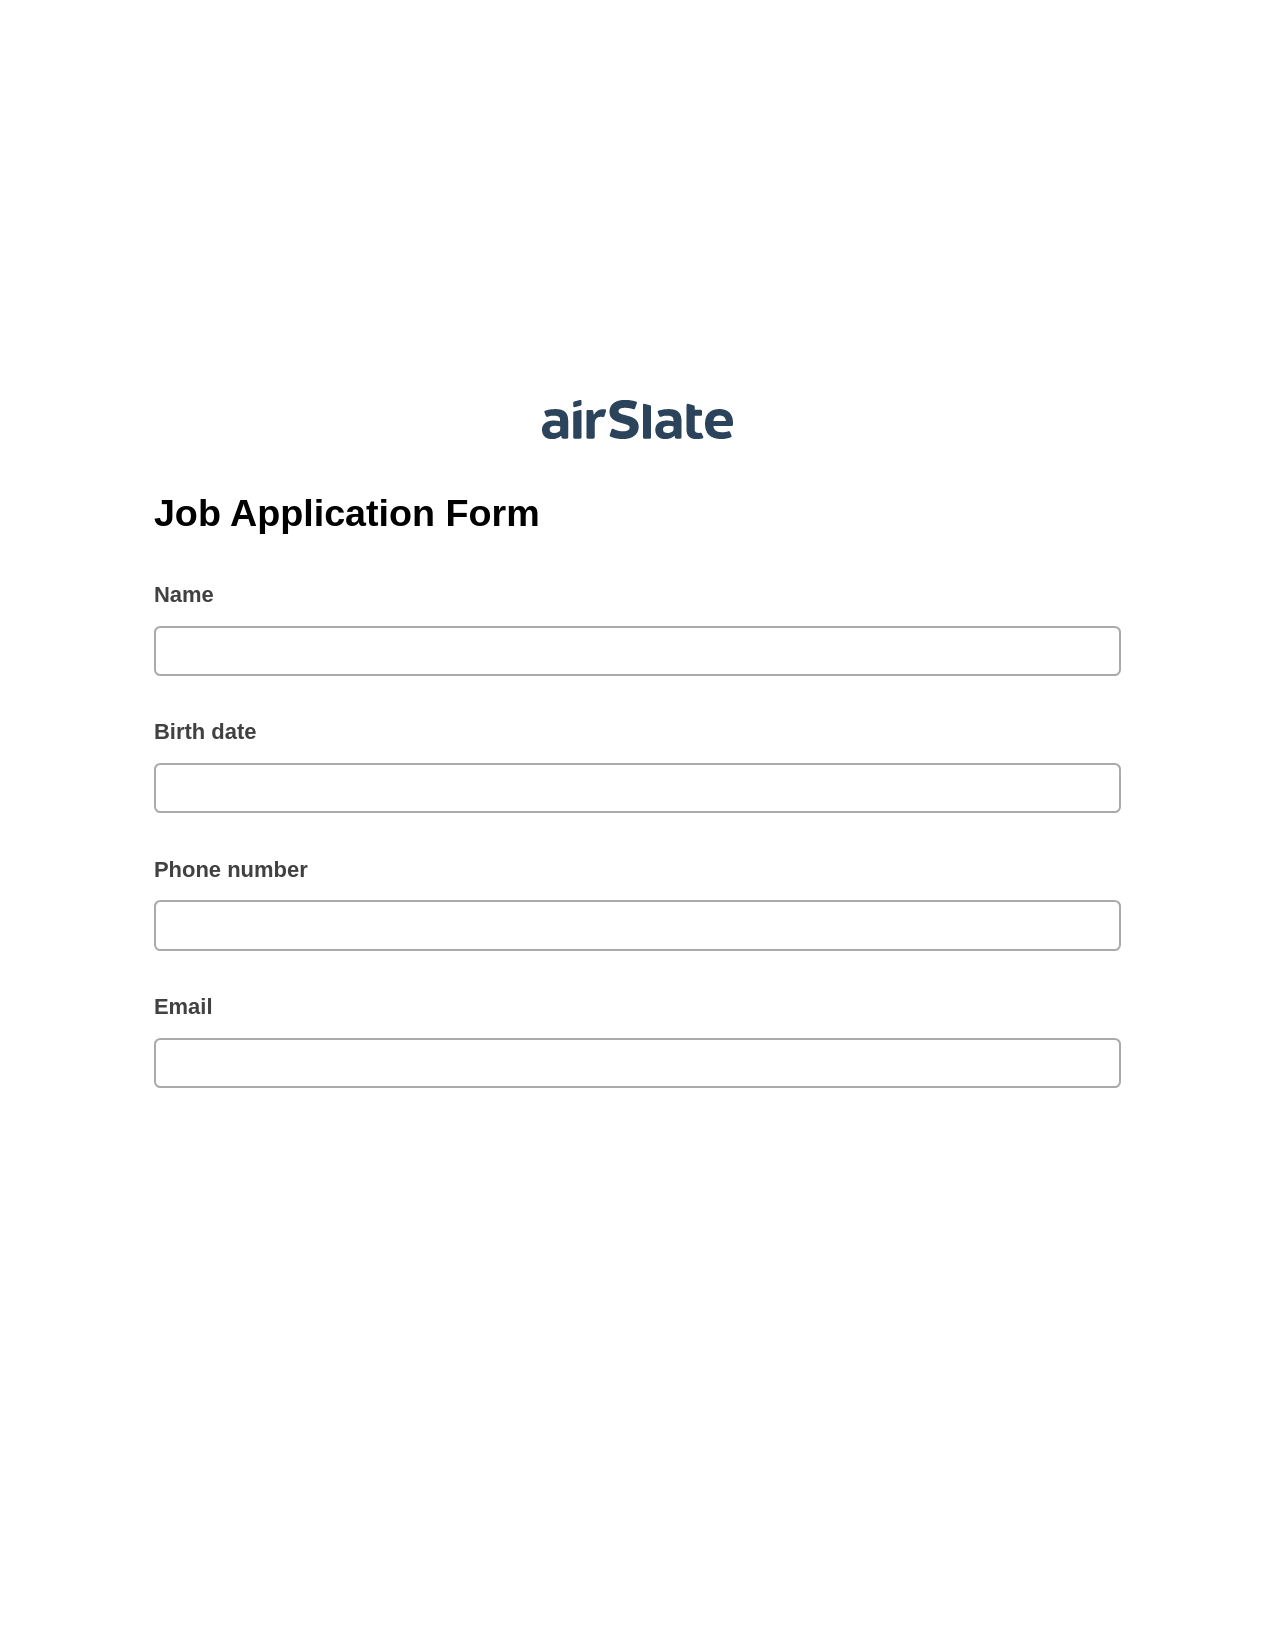 Job Application Form Pre-fill from Google Sheet Dropdown Options Bot, System Bot - Create a Slate in another Flow, Slack Notification Postfinish Bot